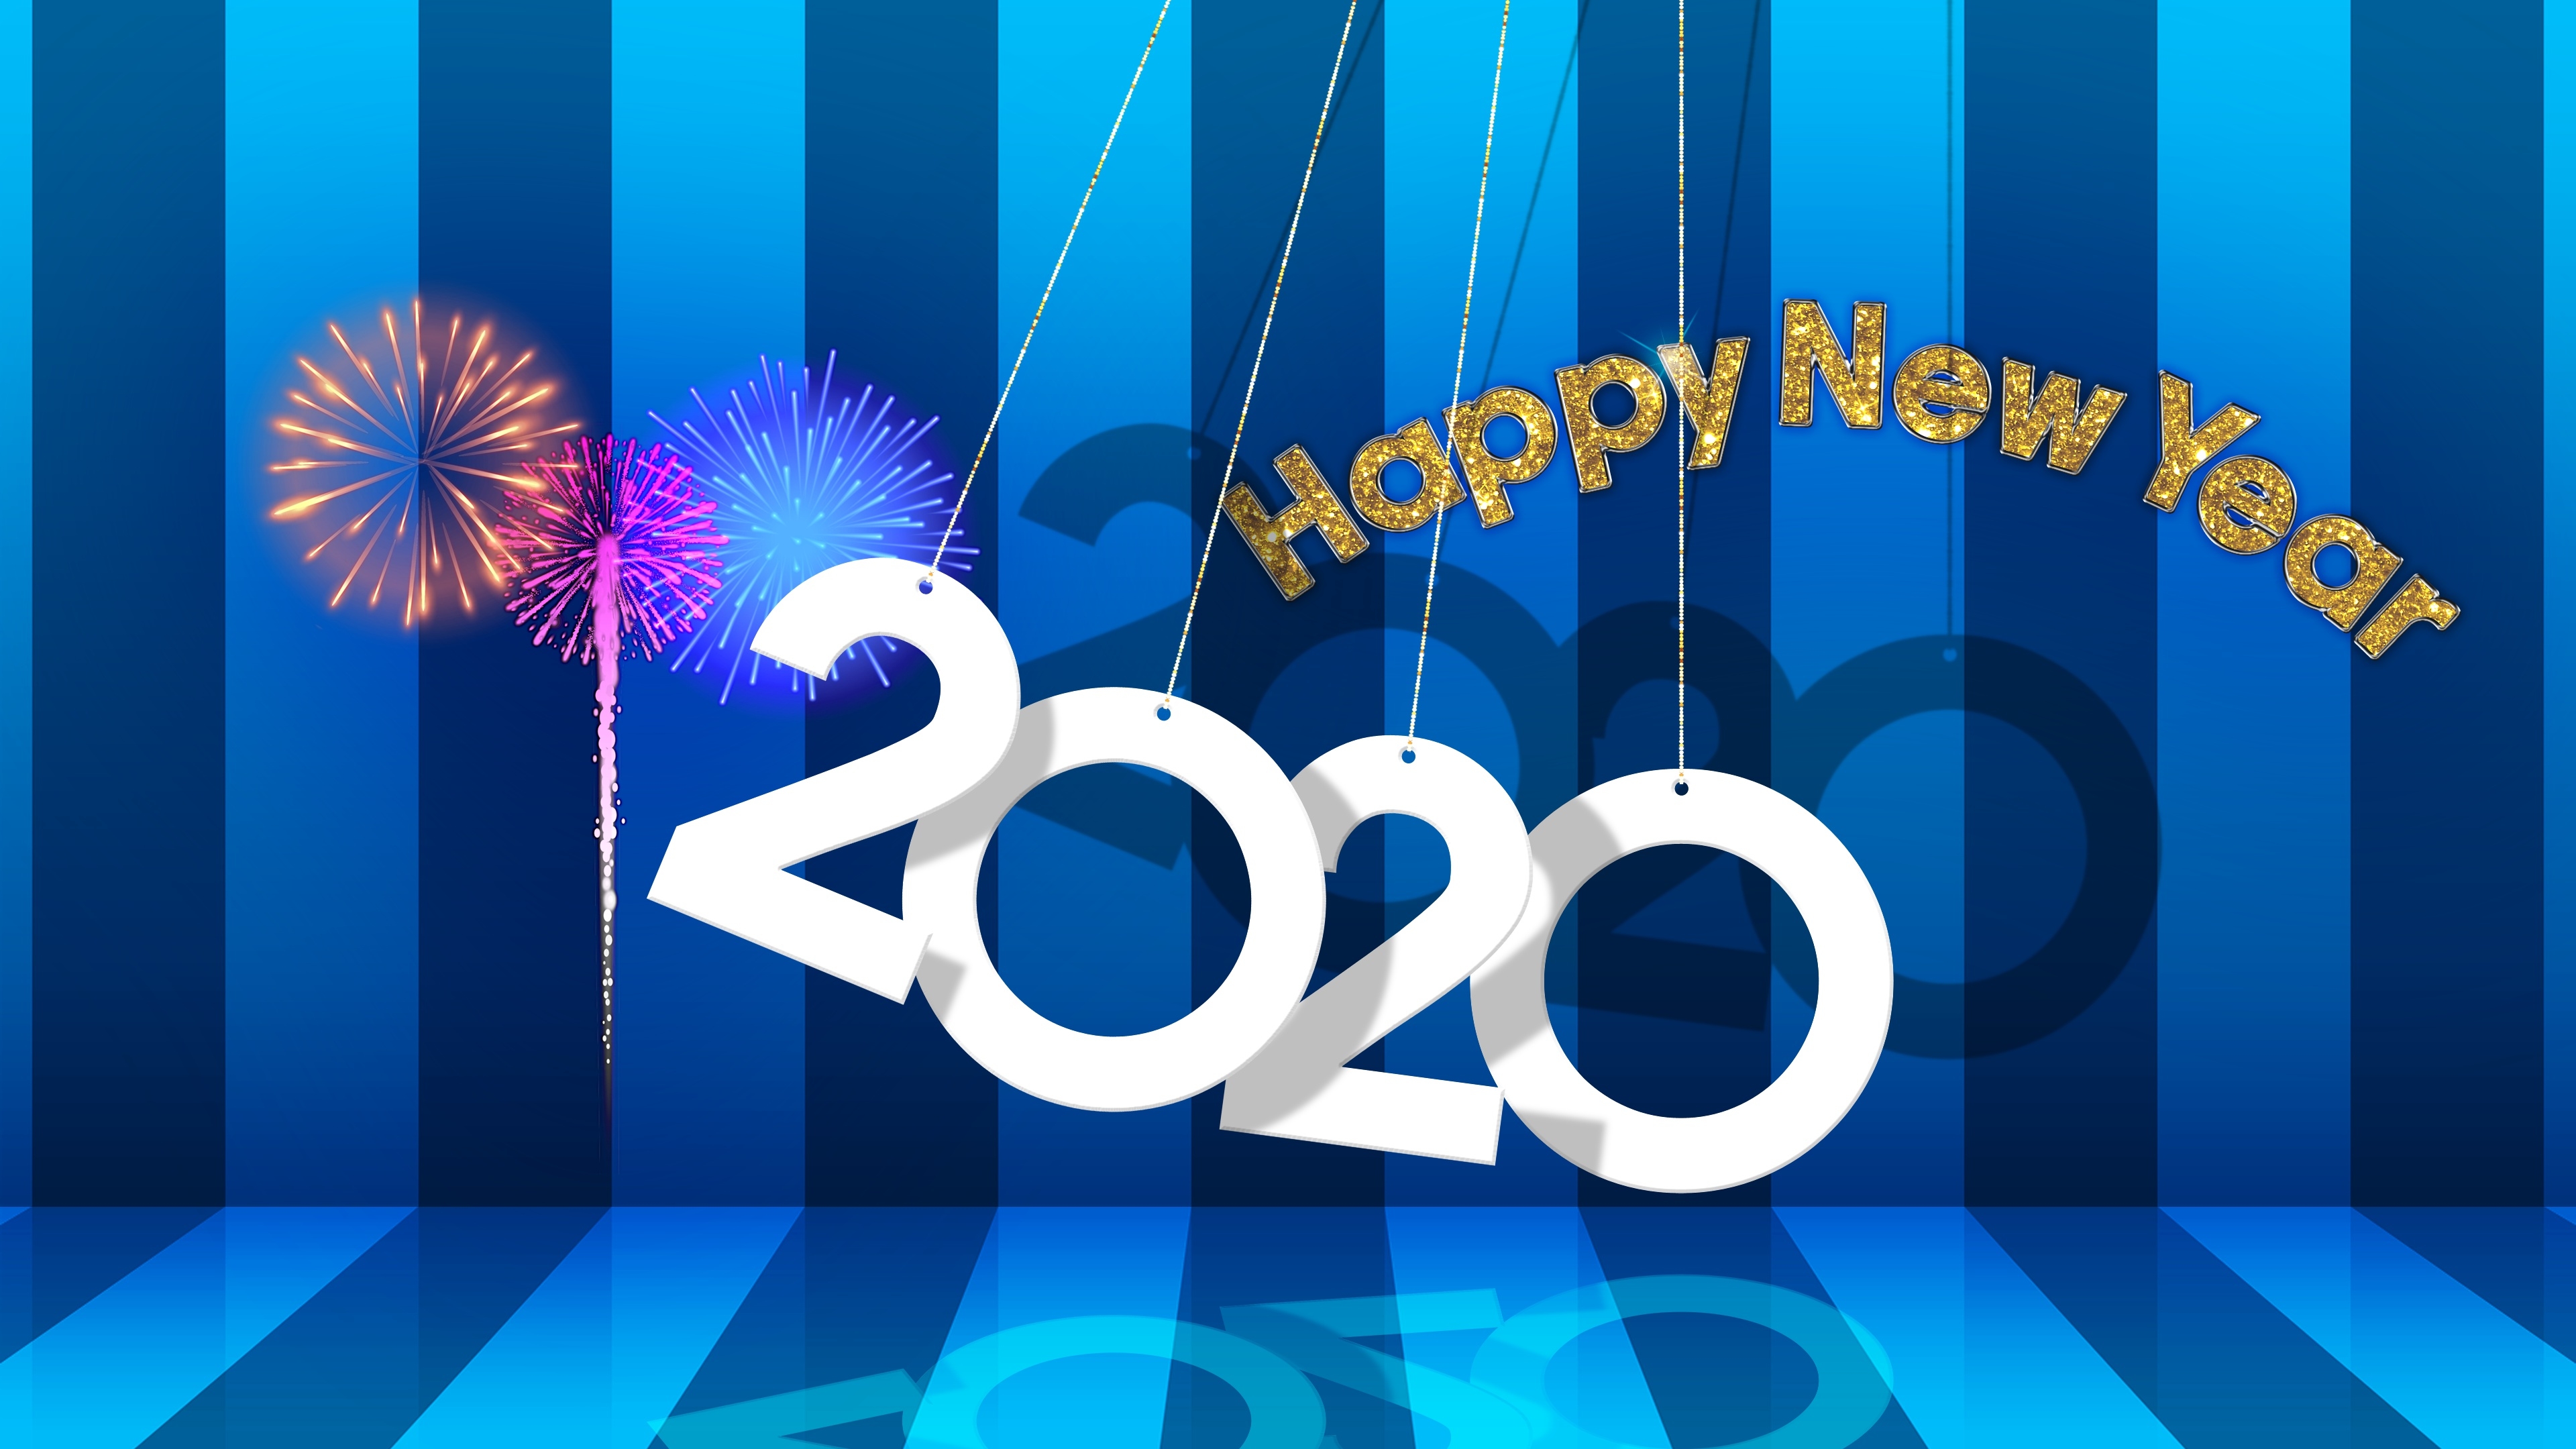 New Year 2020 Wallpaper, HD Other 4K Wallpapers, Images ...